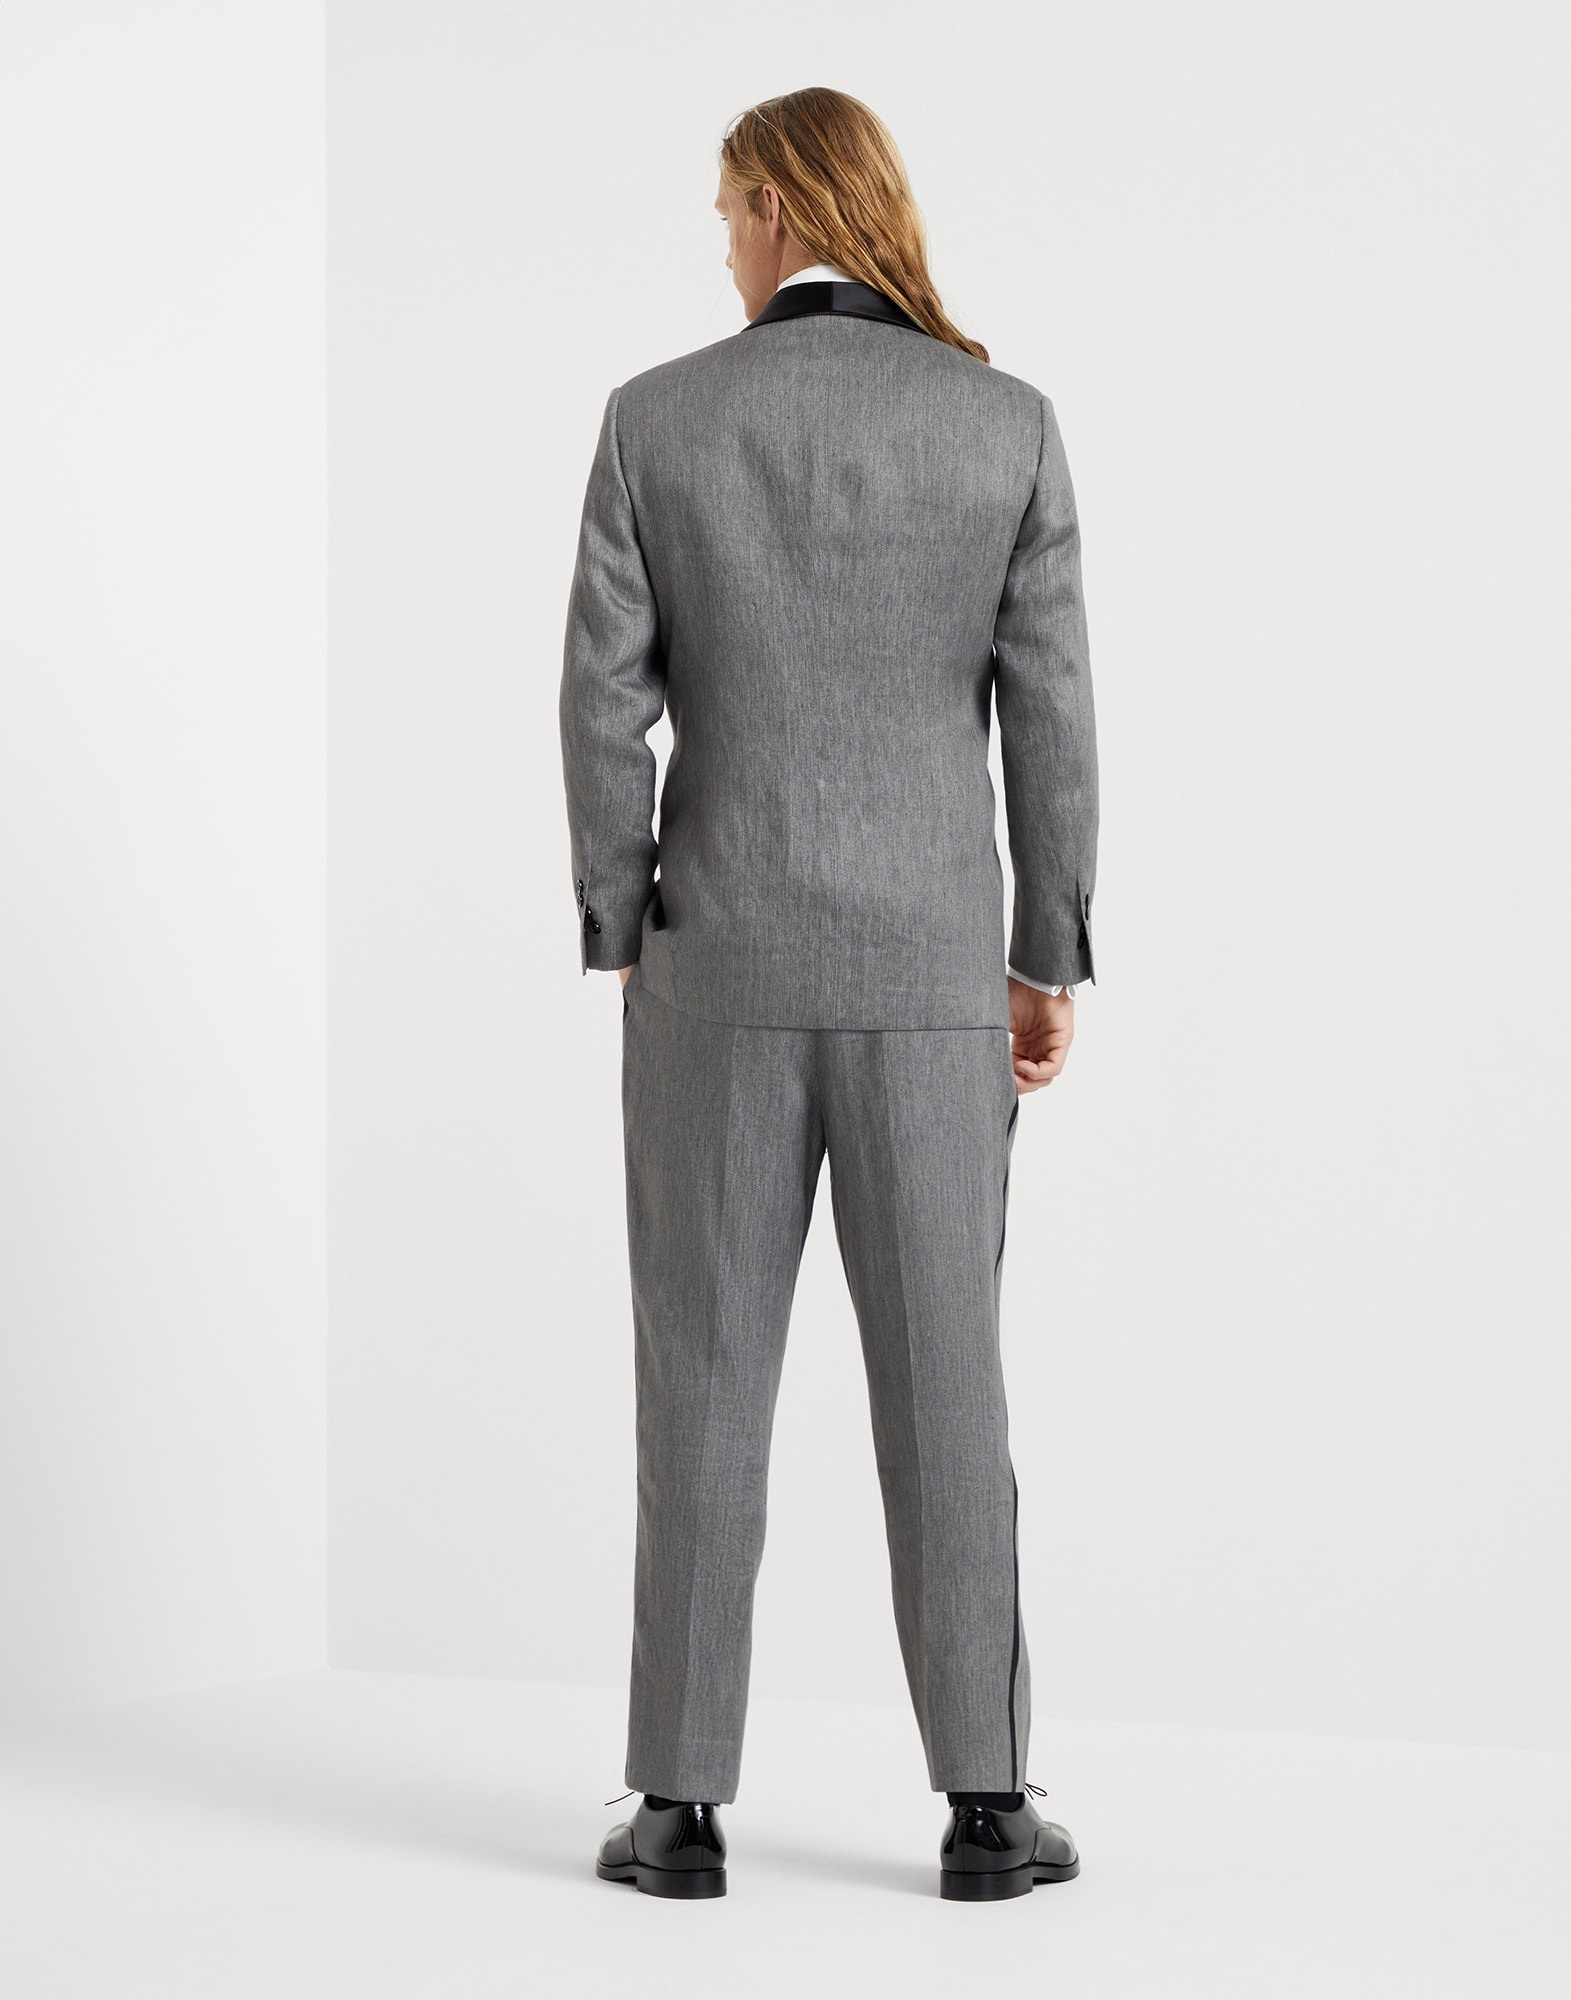 Délavé linen satin tuxedo with shawl lapel jacket and pleated trousers - 2